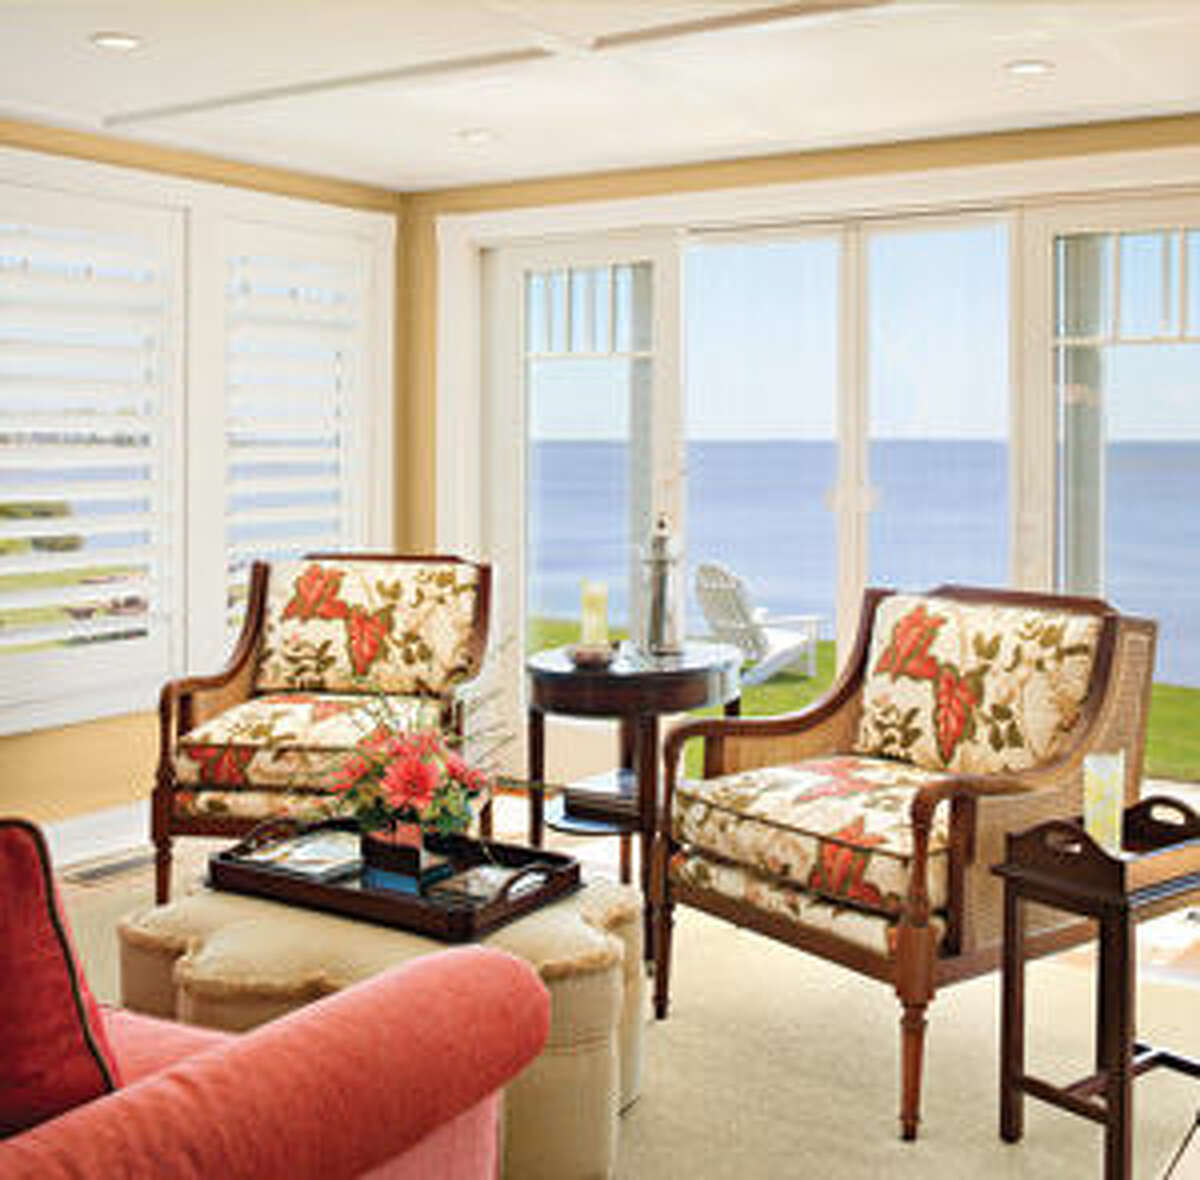 Poulin opened the back wall of thehouse to the sea, creating the stunning view that defines the space. To further enhance the effect she chose low-backed couches and chairs that would not obstruct the view.